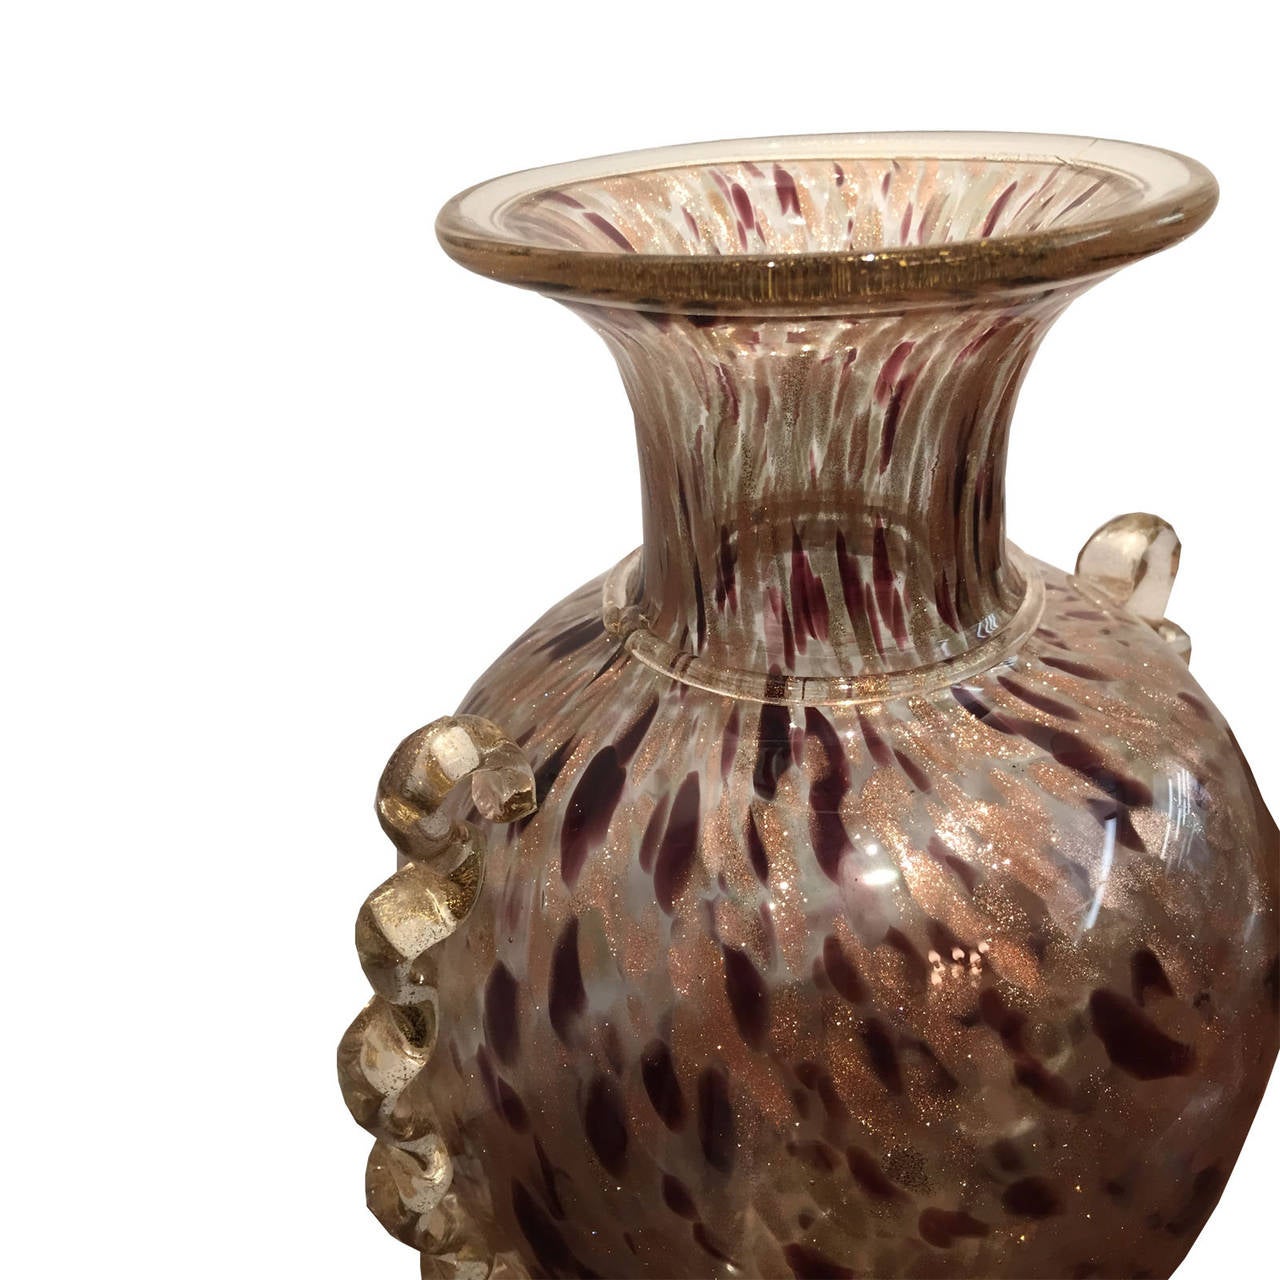 A Vetreria Murano vase designed by Mario Gambaro of deep brown, beige and taupe tones with gold flakes inclusions. The base still retains the manufacturer's label.